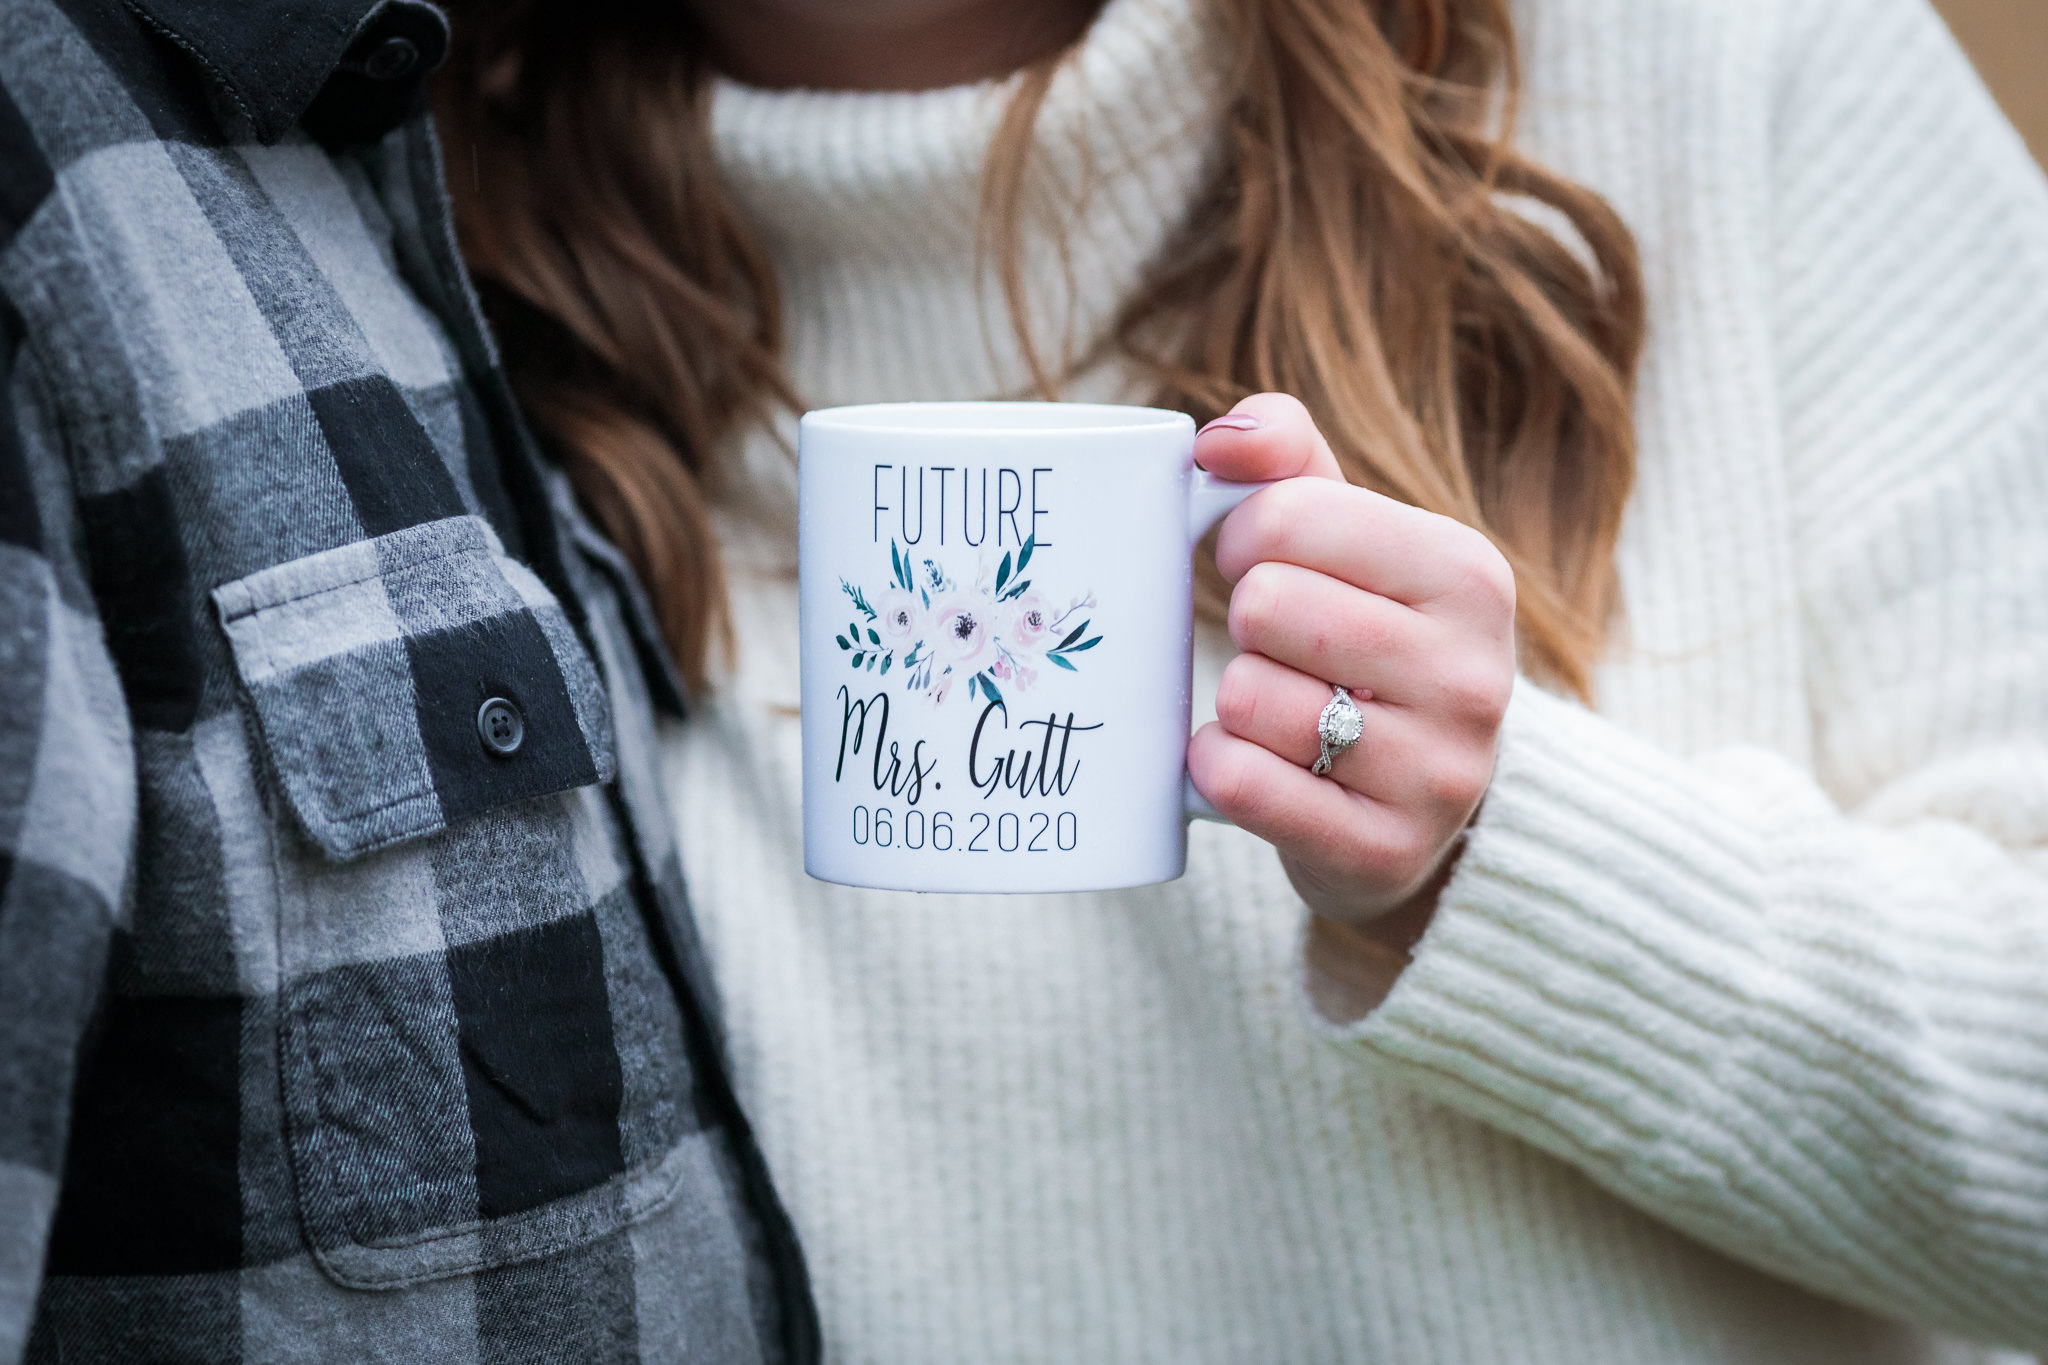 Bride-to-be holds a personalized mug during her North Shore engagement session in Pittsburgh, PA